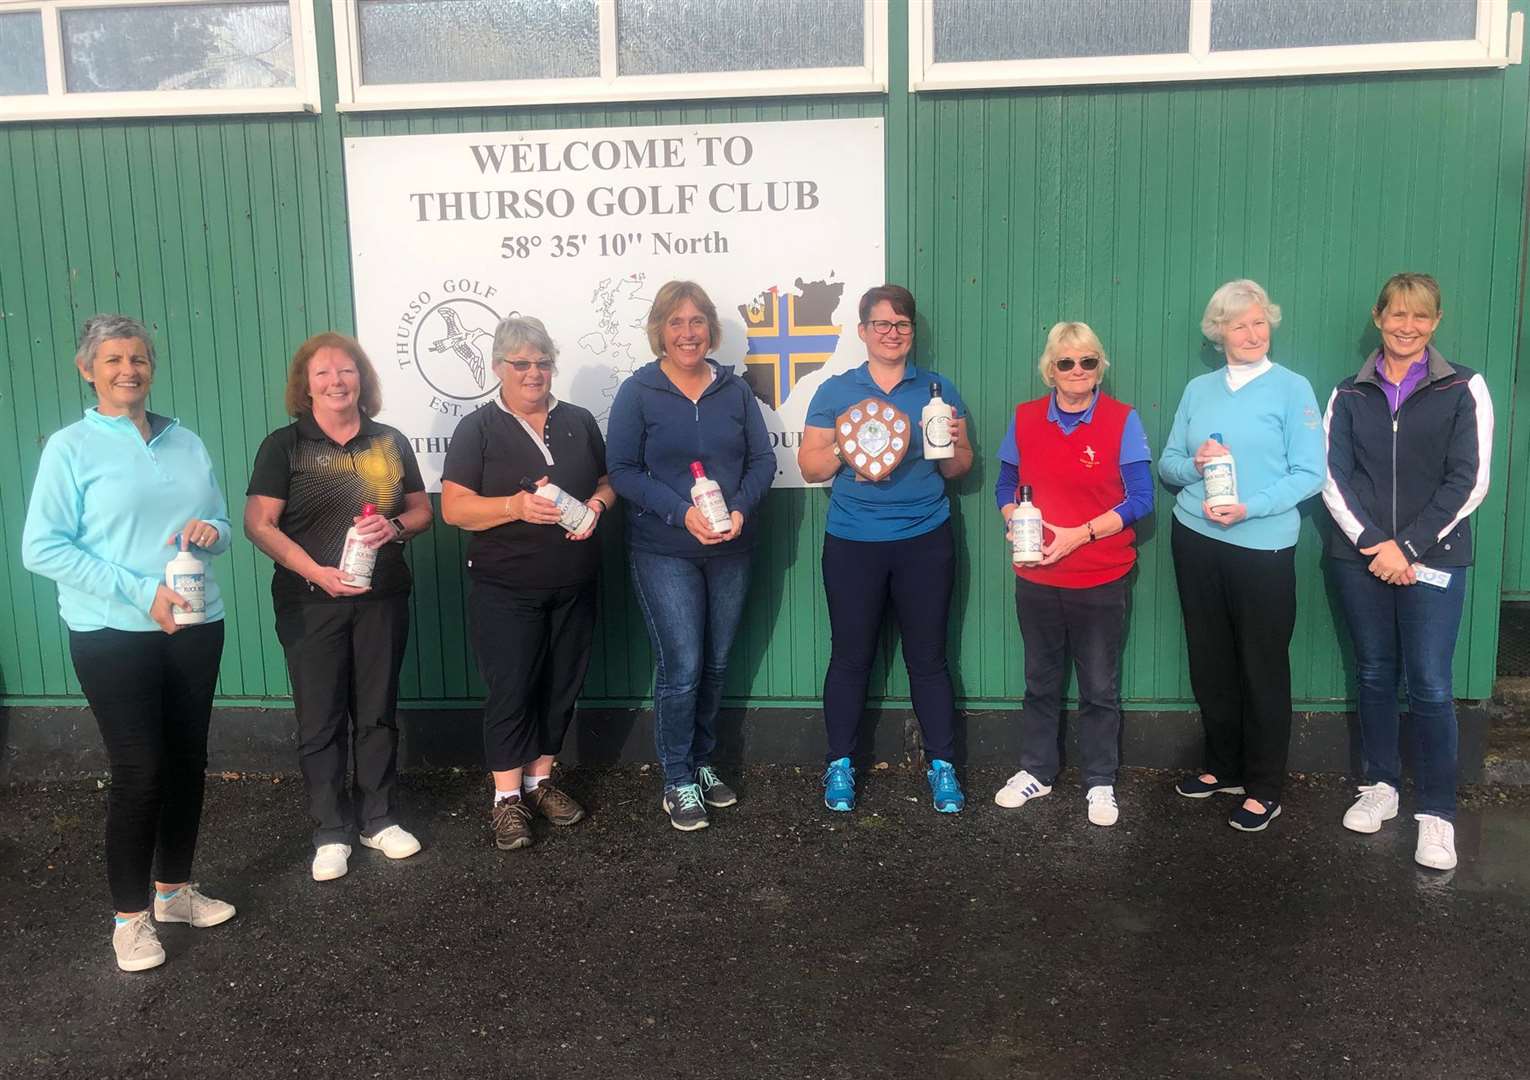 Prizewinners in the Thurso Senior Ladies' Open, sponsored by Rock Rose gin.